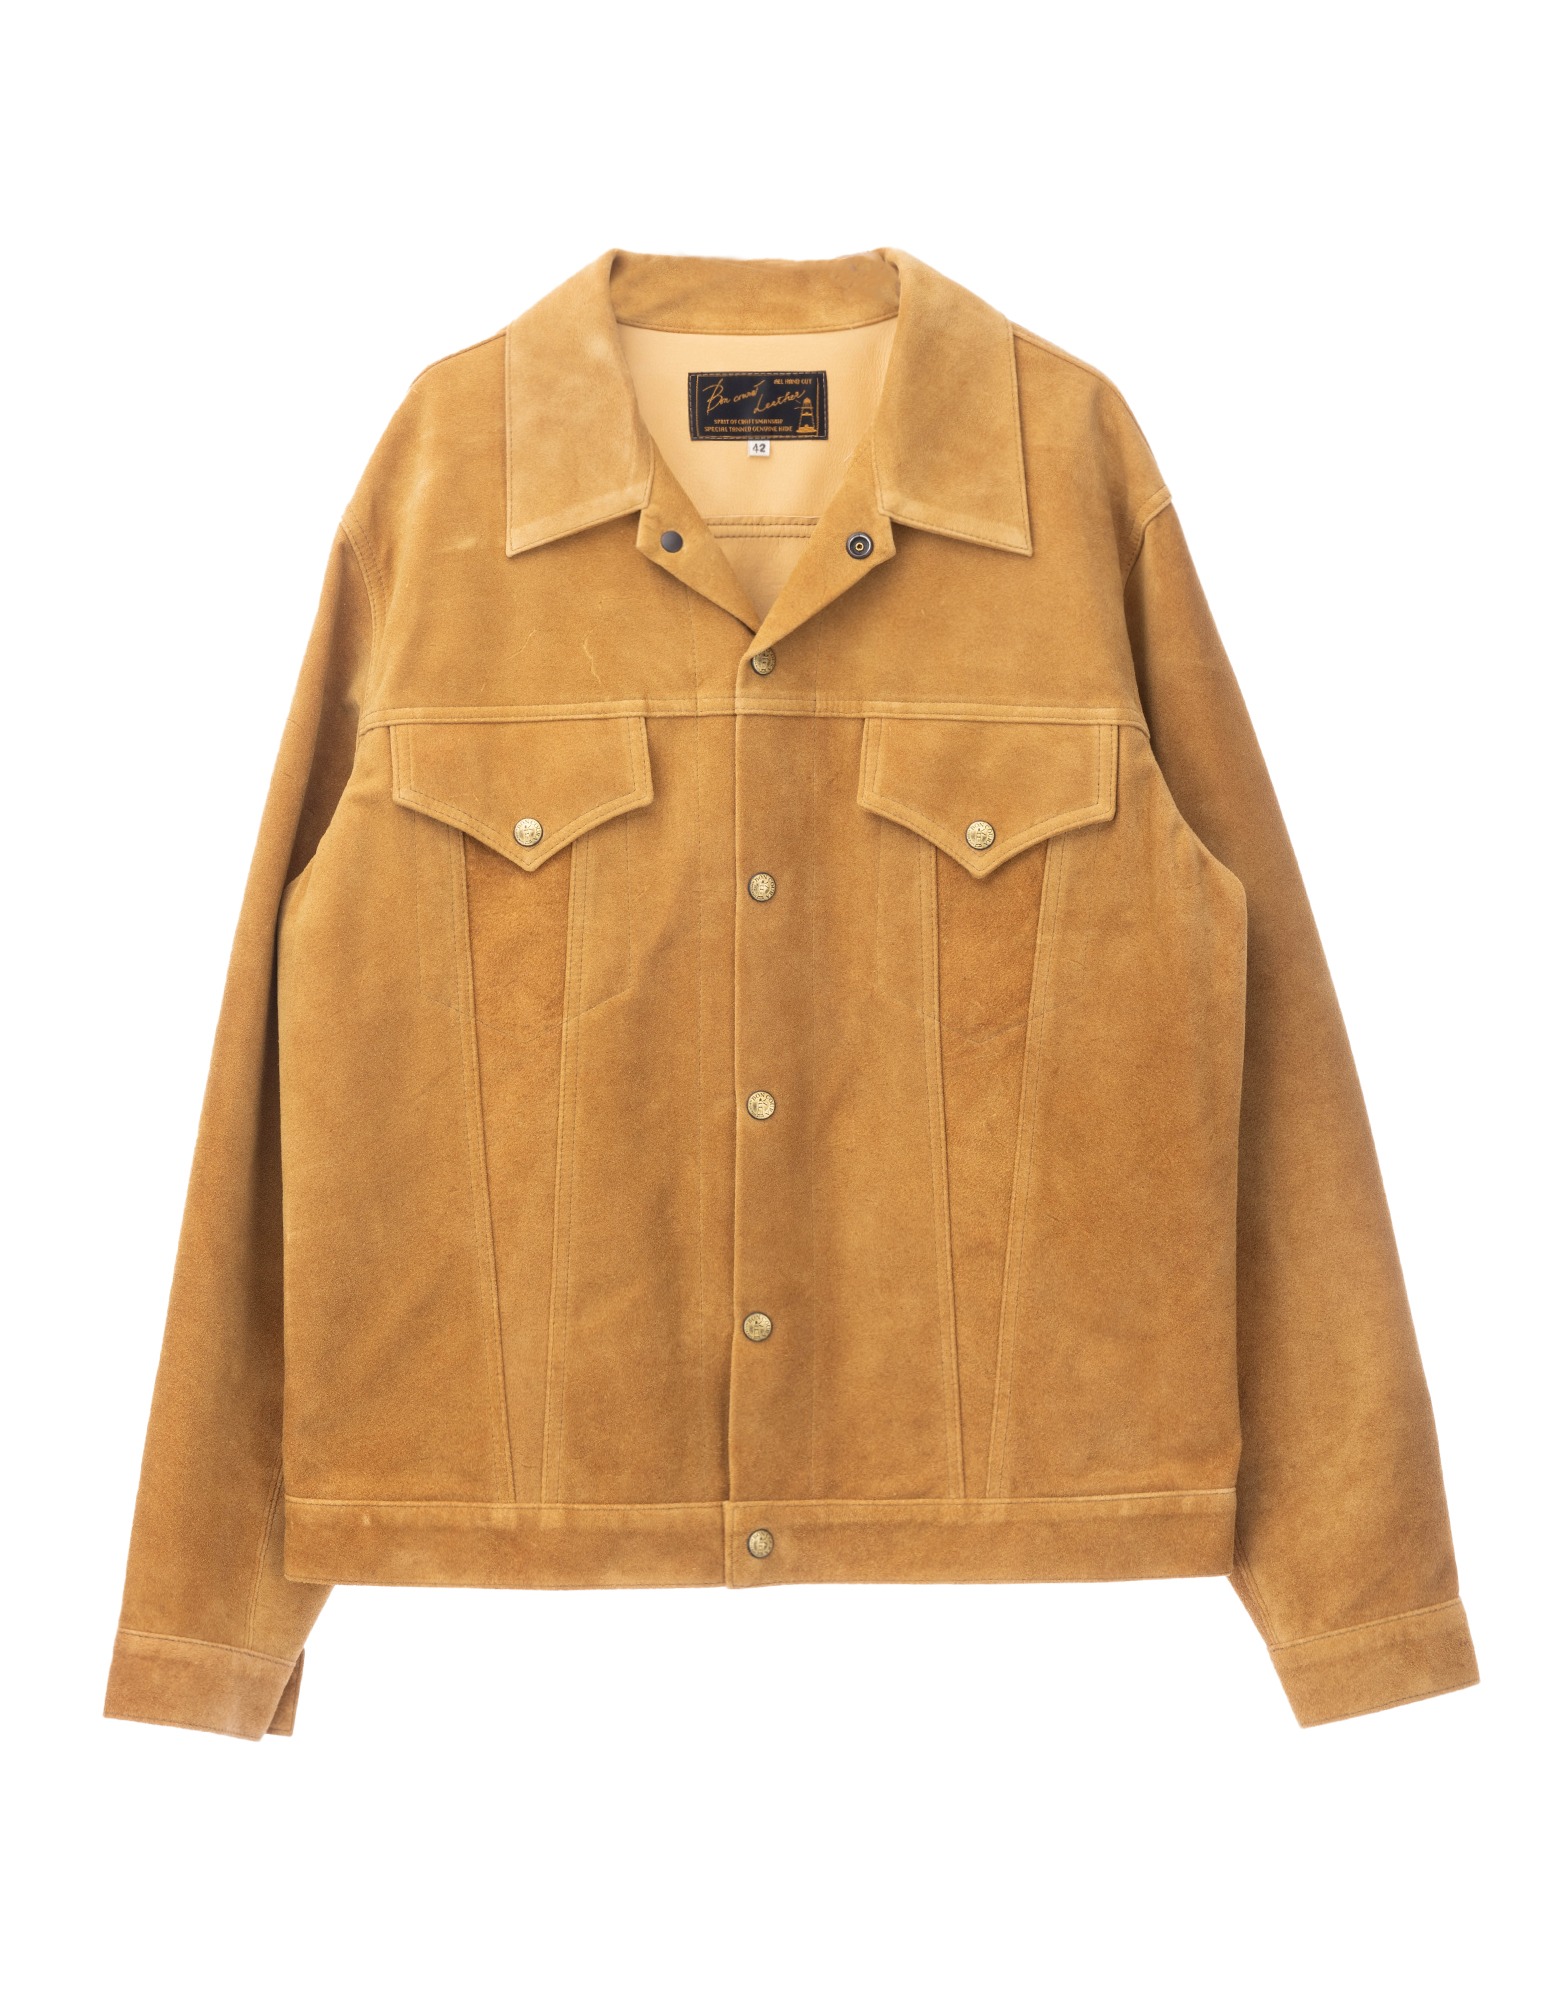 Leather Jacket 3rd Suede (Camel)